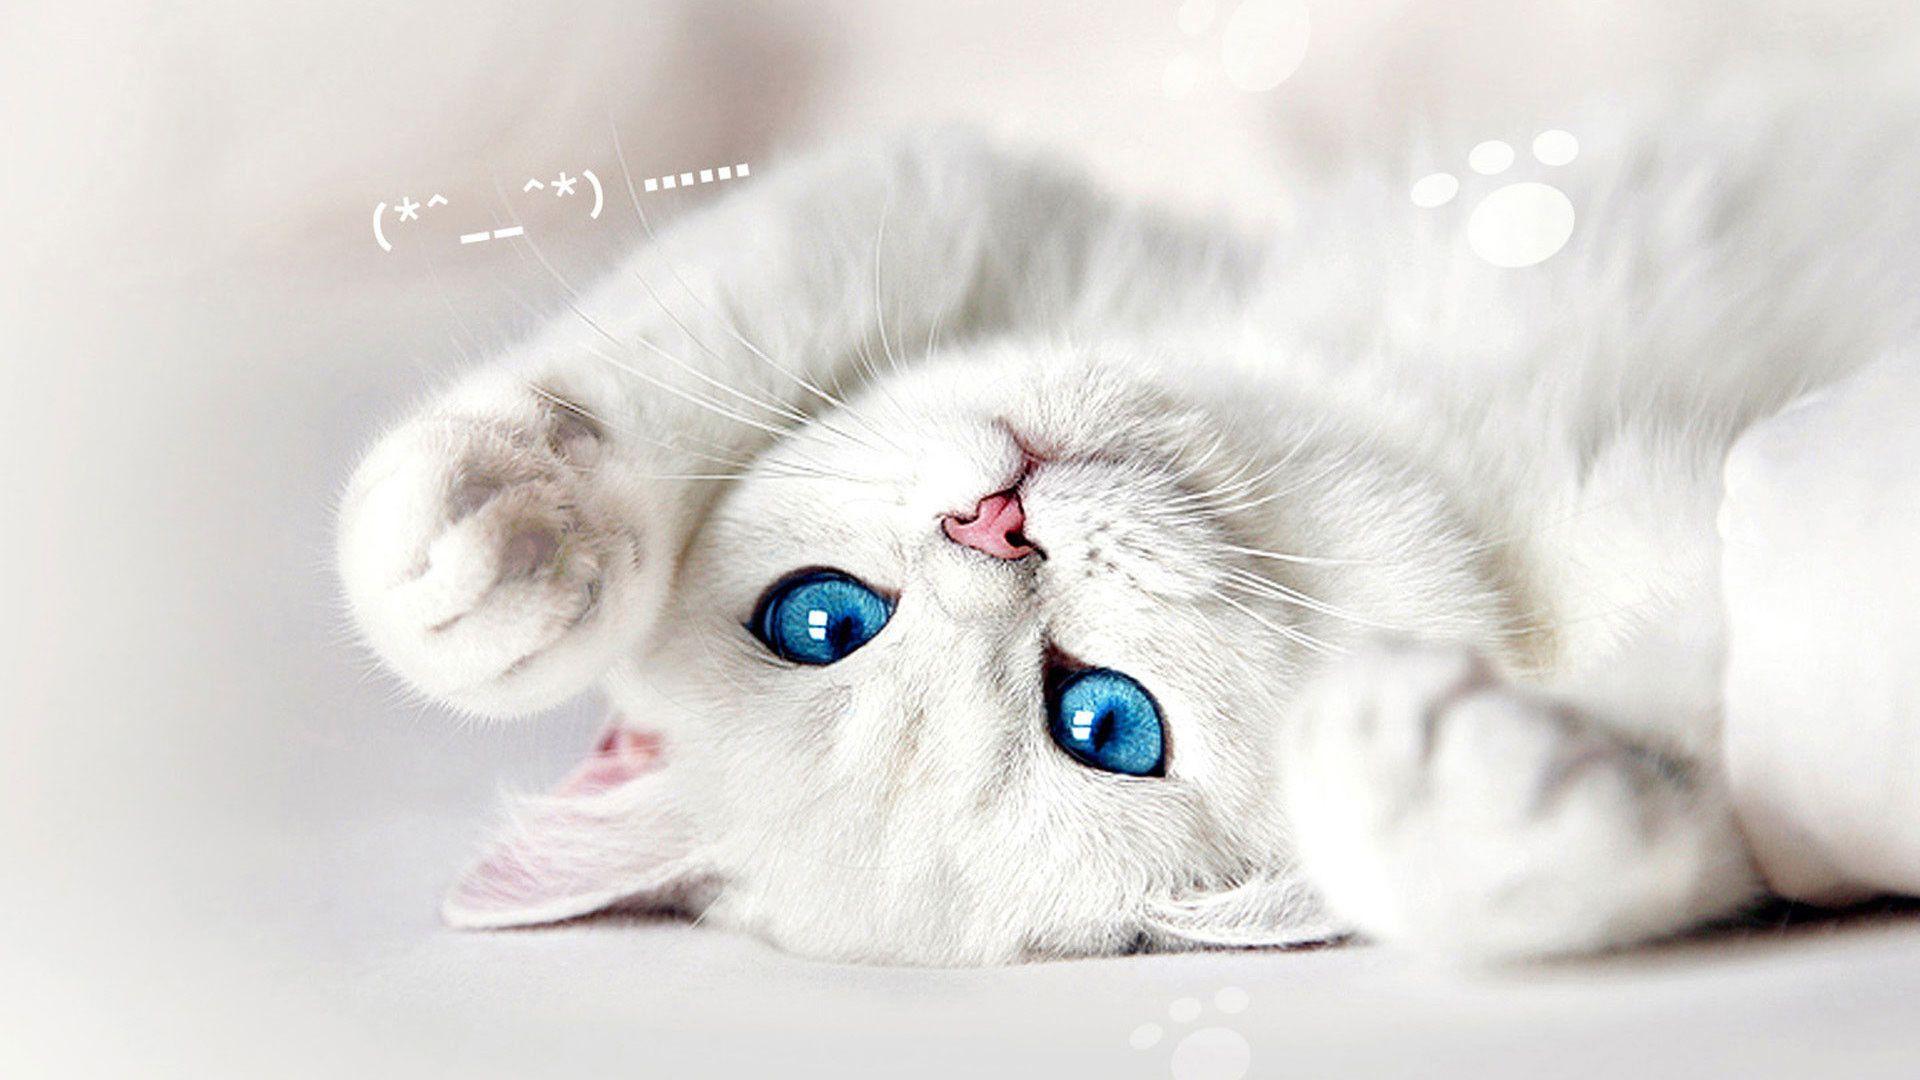 Aesthetic Cat Wallpapers - Top Free Aesthetic Cat Backgrounds